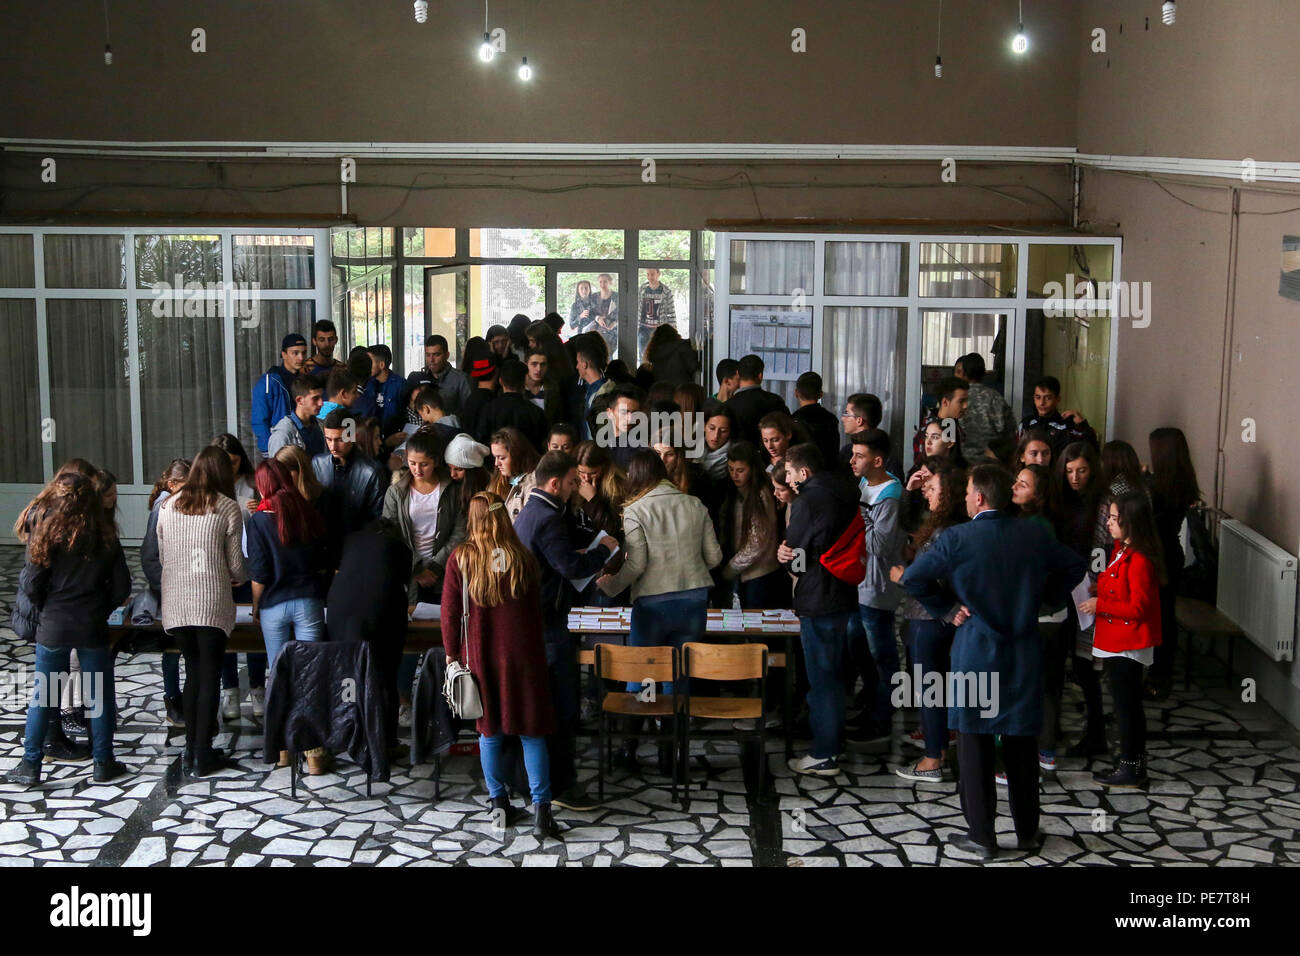 Students fill the foyer of a school in Kacanik, Kosovo, waiting to register and sign in for an Oct. 17, 2015, Violence Free Future tolerance event hosted by the Rotary Club out of Pristina, Kosovo. More than 100 students attended the event, which included a question-and-answer panel about discrimination, a speaker who talked about leadership and respect for others within the community, and a session of sports-like games that mimicked life situations dealing with stereotypes. (U.S. Army photo by Staff Sgt. Mary Junell, Multinational Battle Group-East) Stock Photo